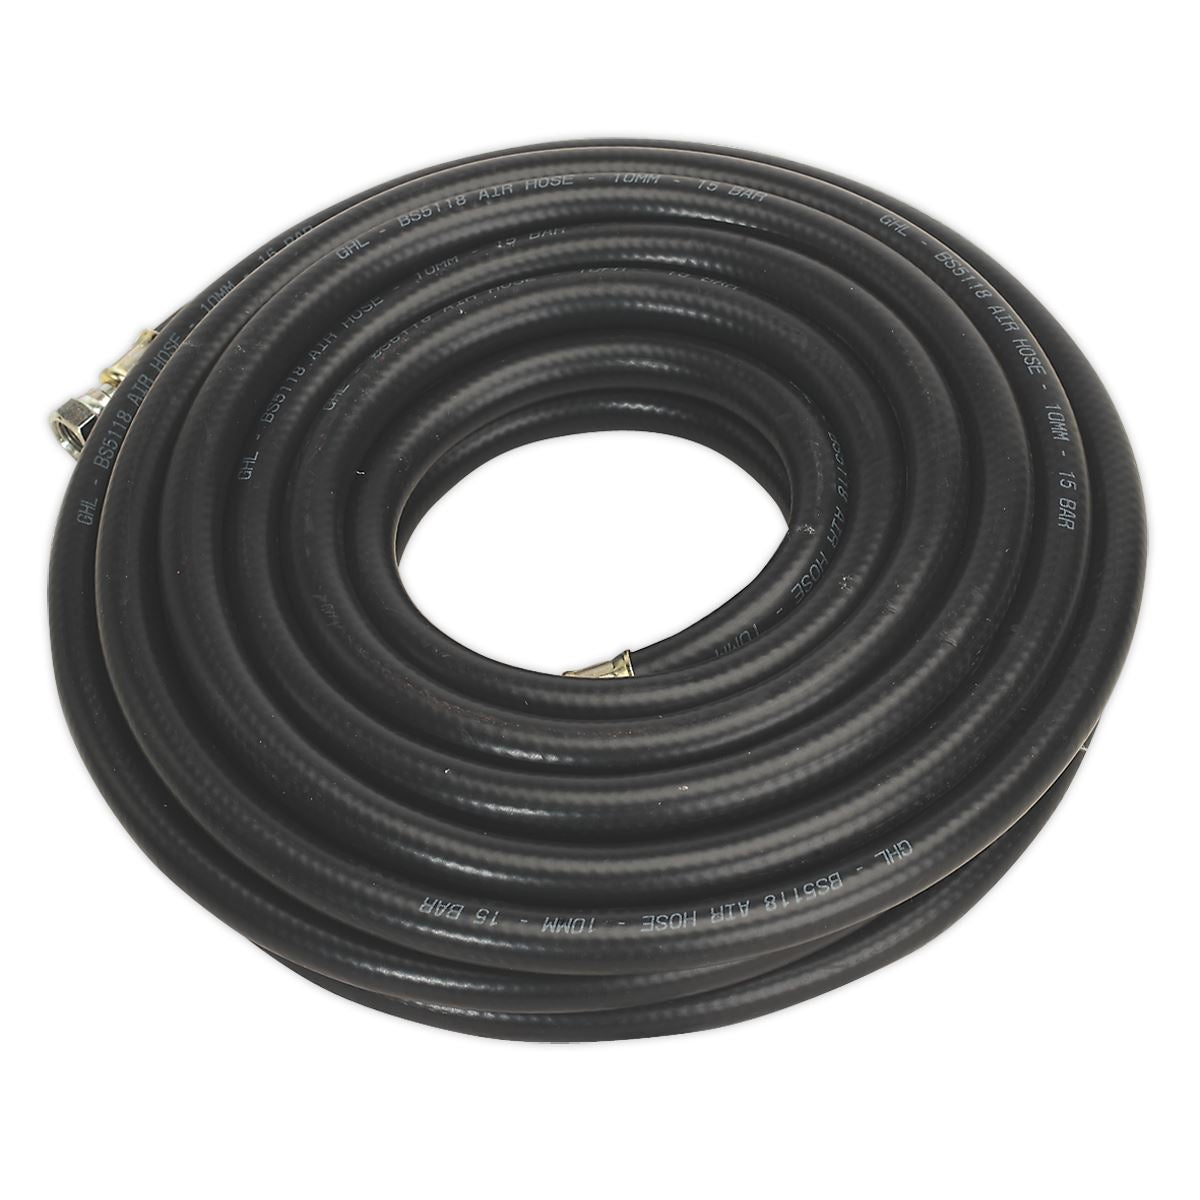 Sealey Air Hose 10m x Ø10mm with 1/4"BSP Unions Heavy-Duty